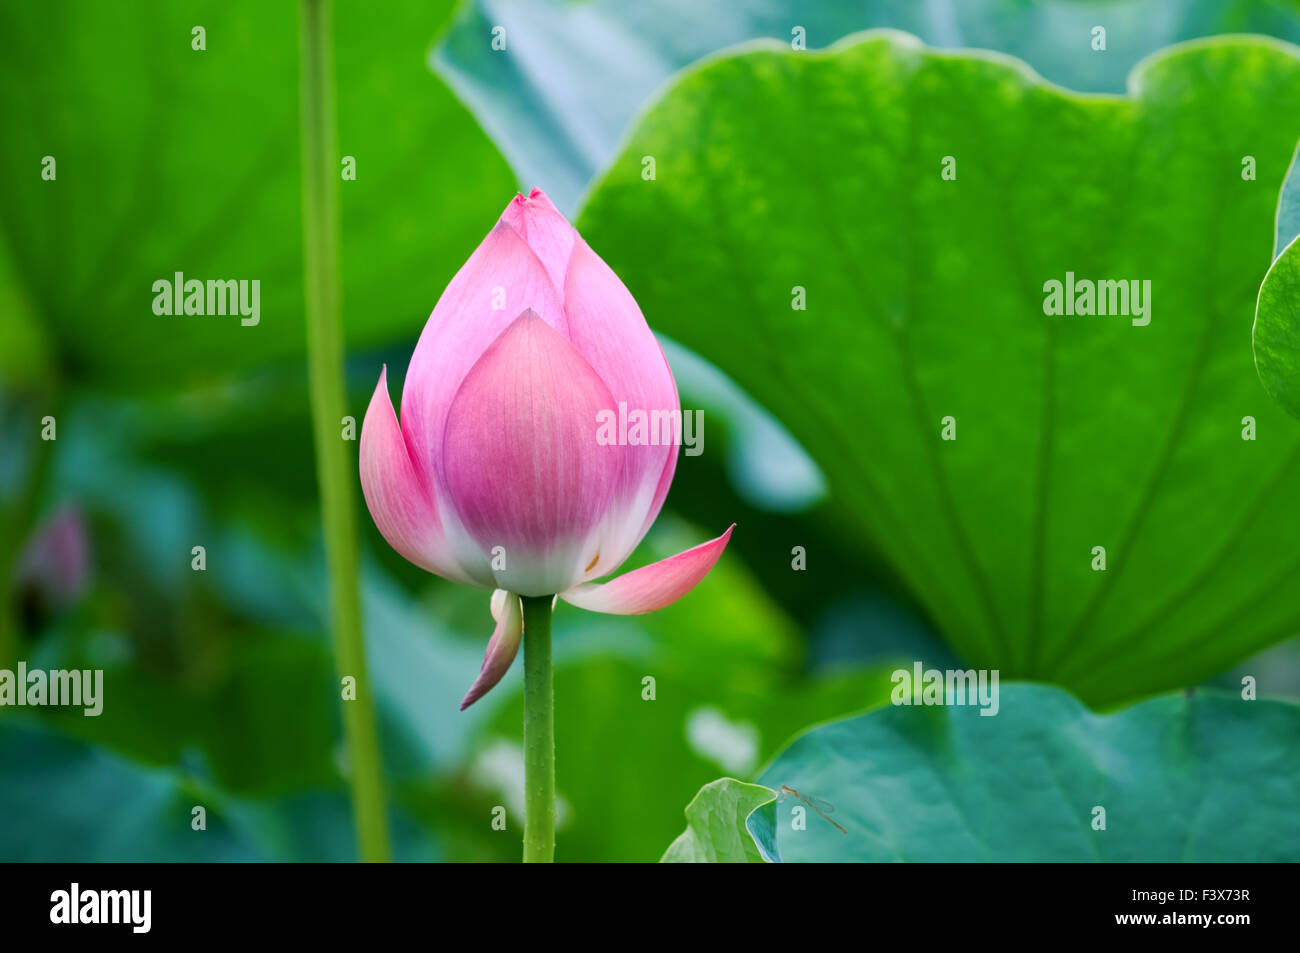 The shot of lotus leafs and the blossom Stock Photo